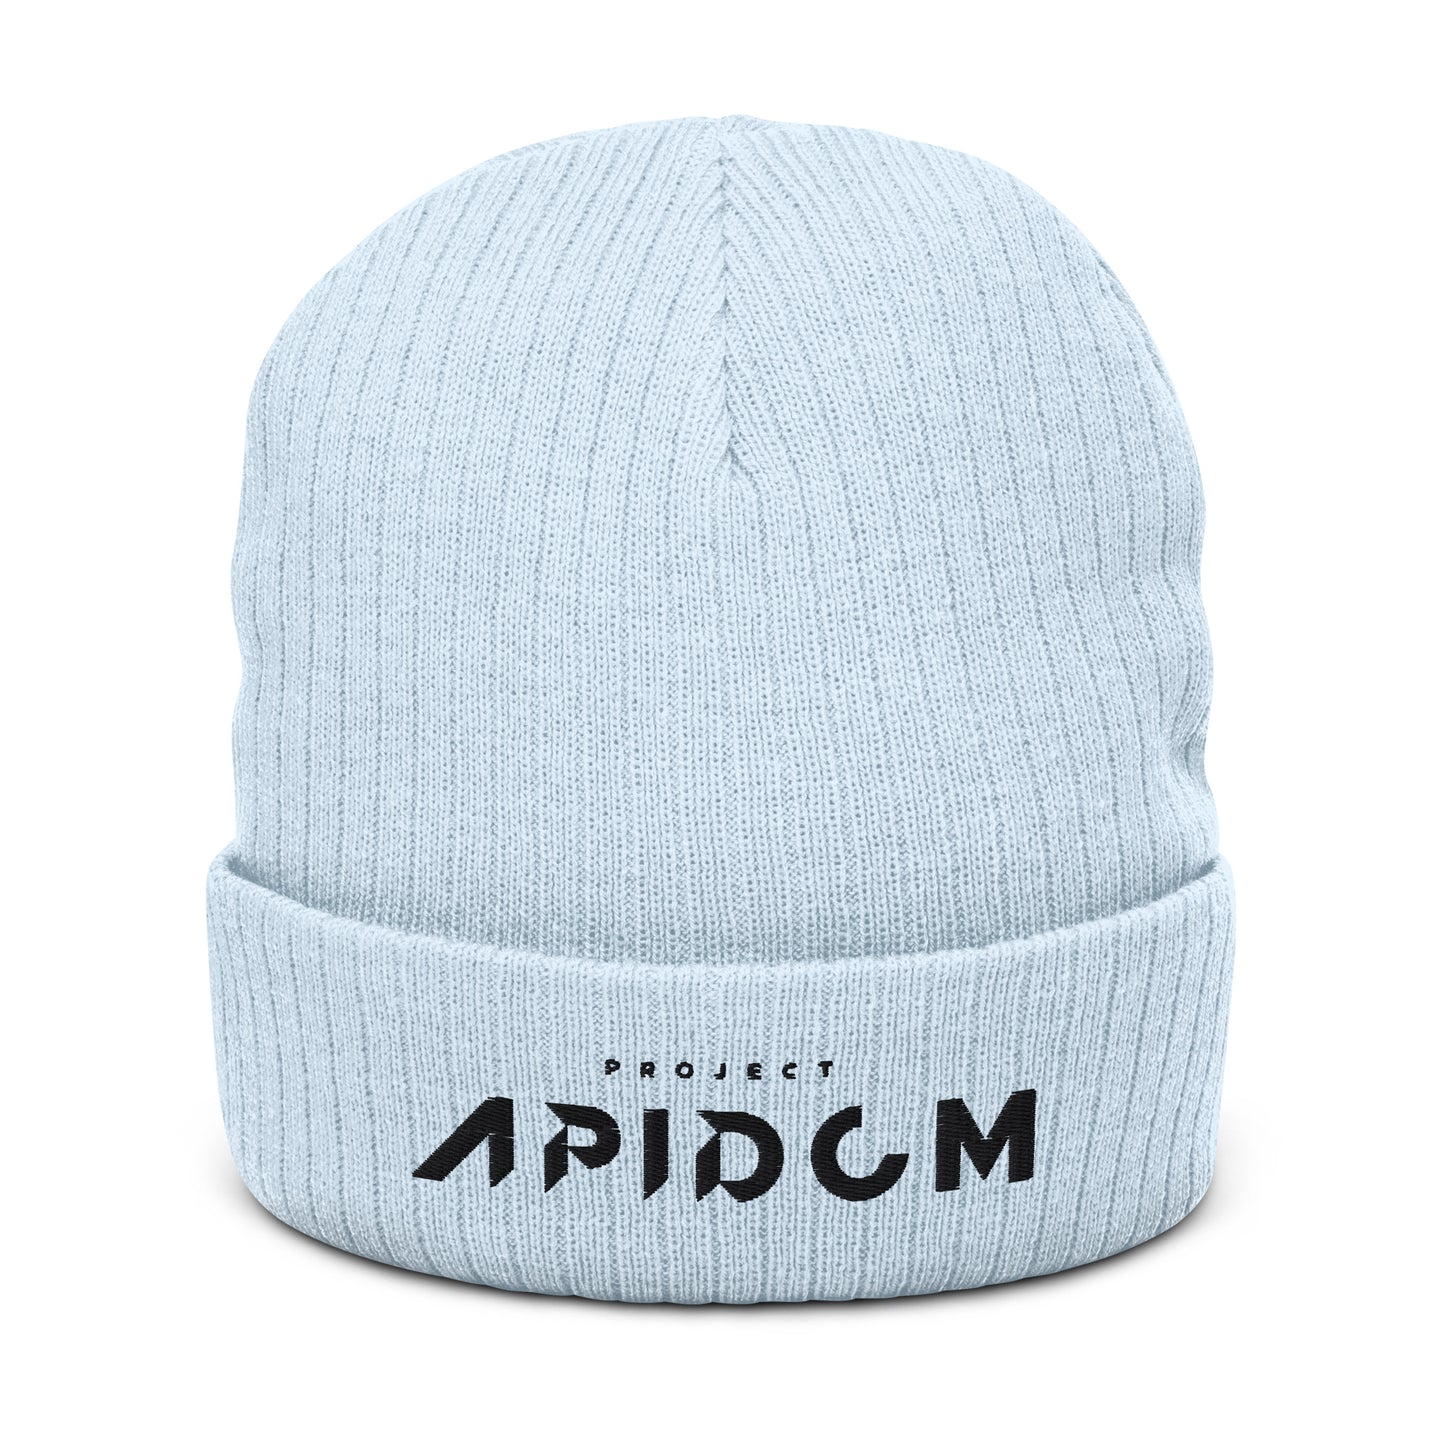 Project_Apidom_2_Ribbed knit beanie